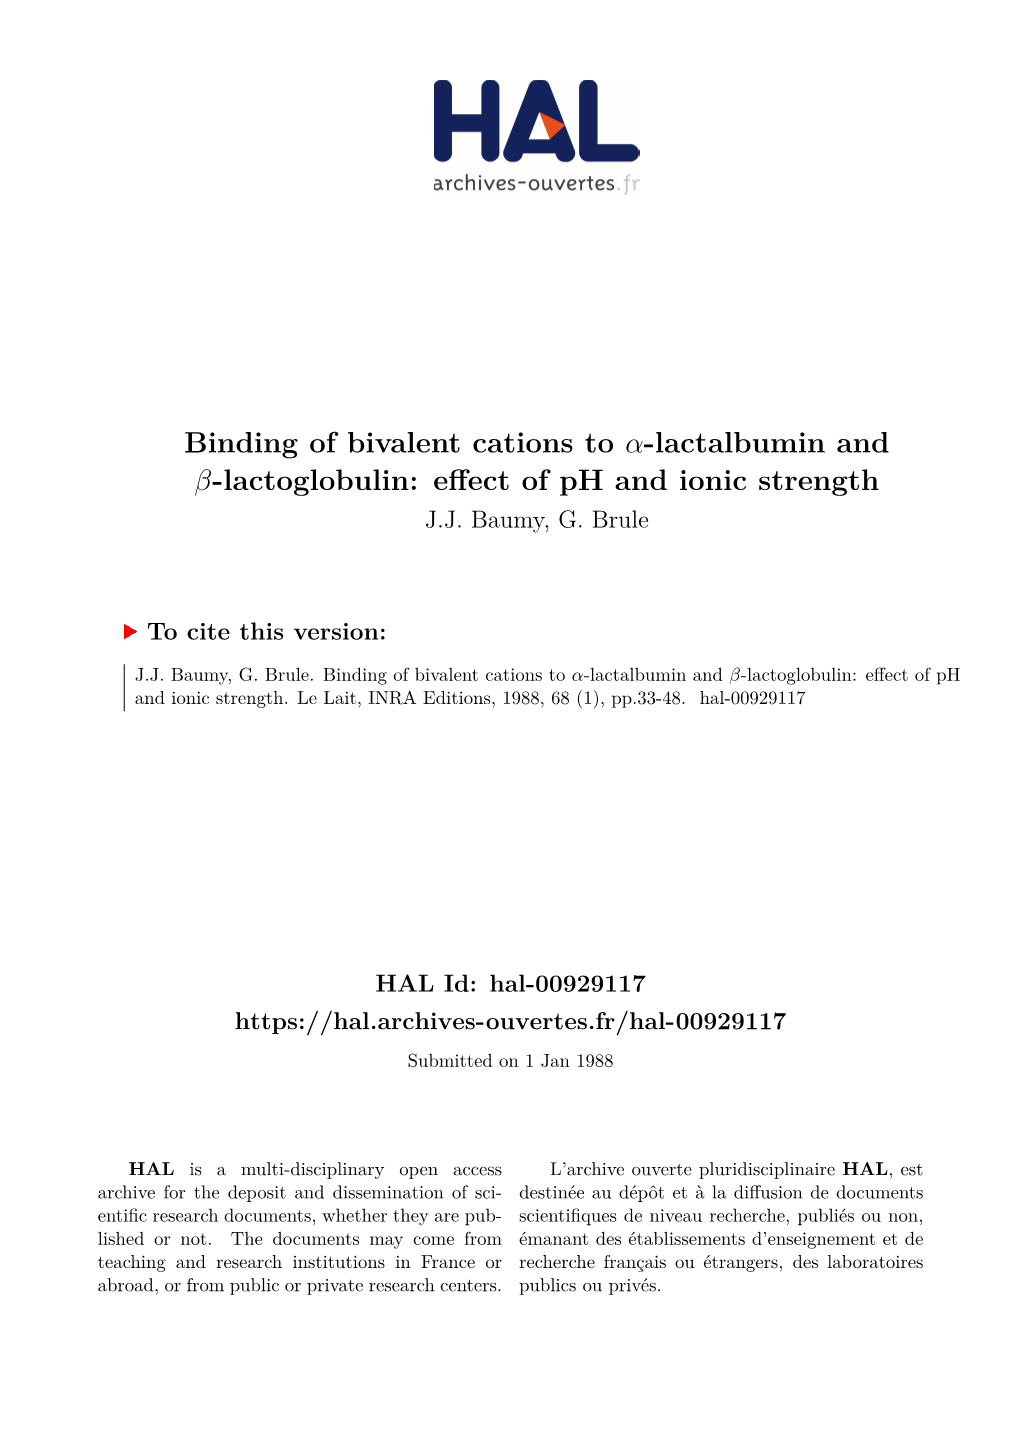 Binding of Bivalent Cations to Α-Lactalbumin and Β-Lactoglobulin: Effect of Ph and Ionic Strength J.J